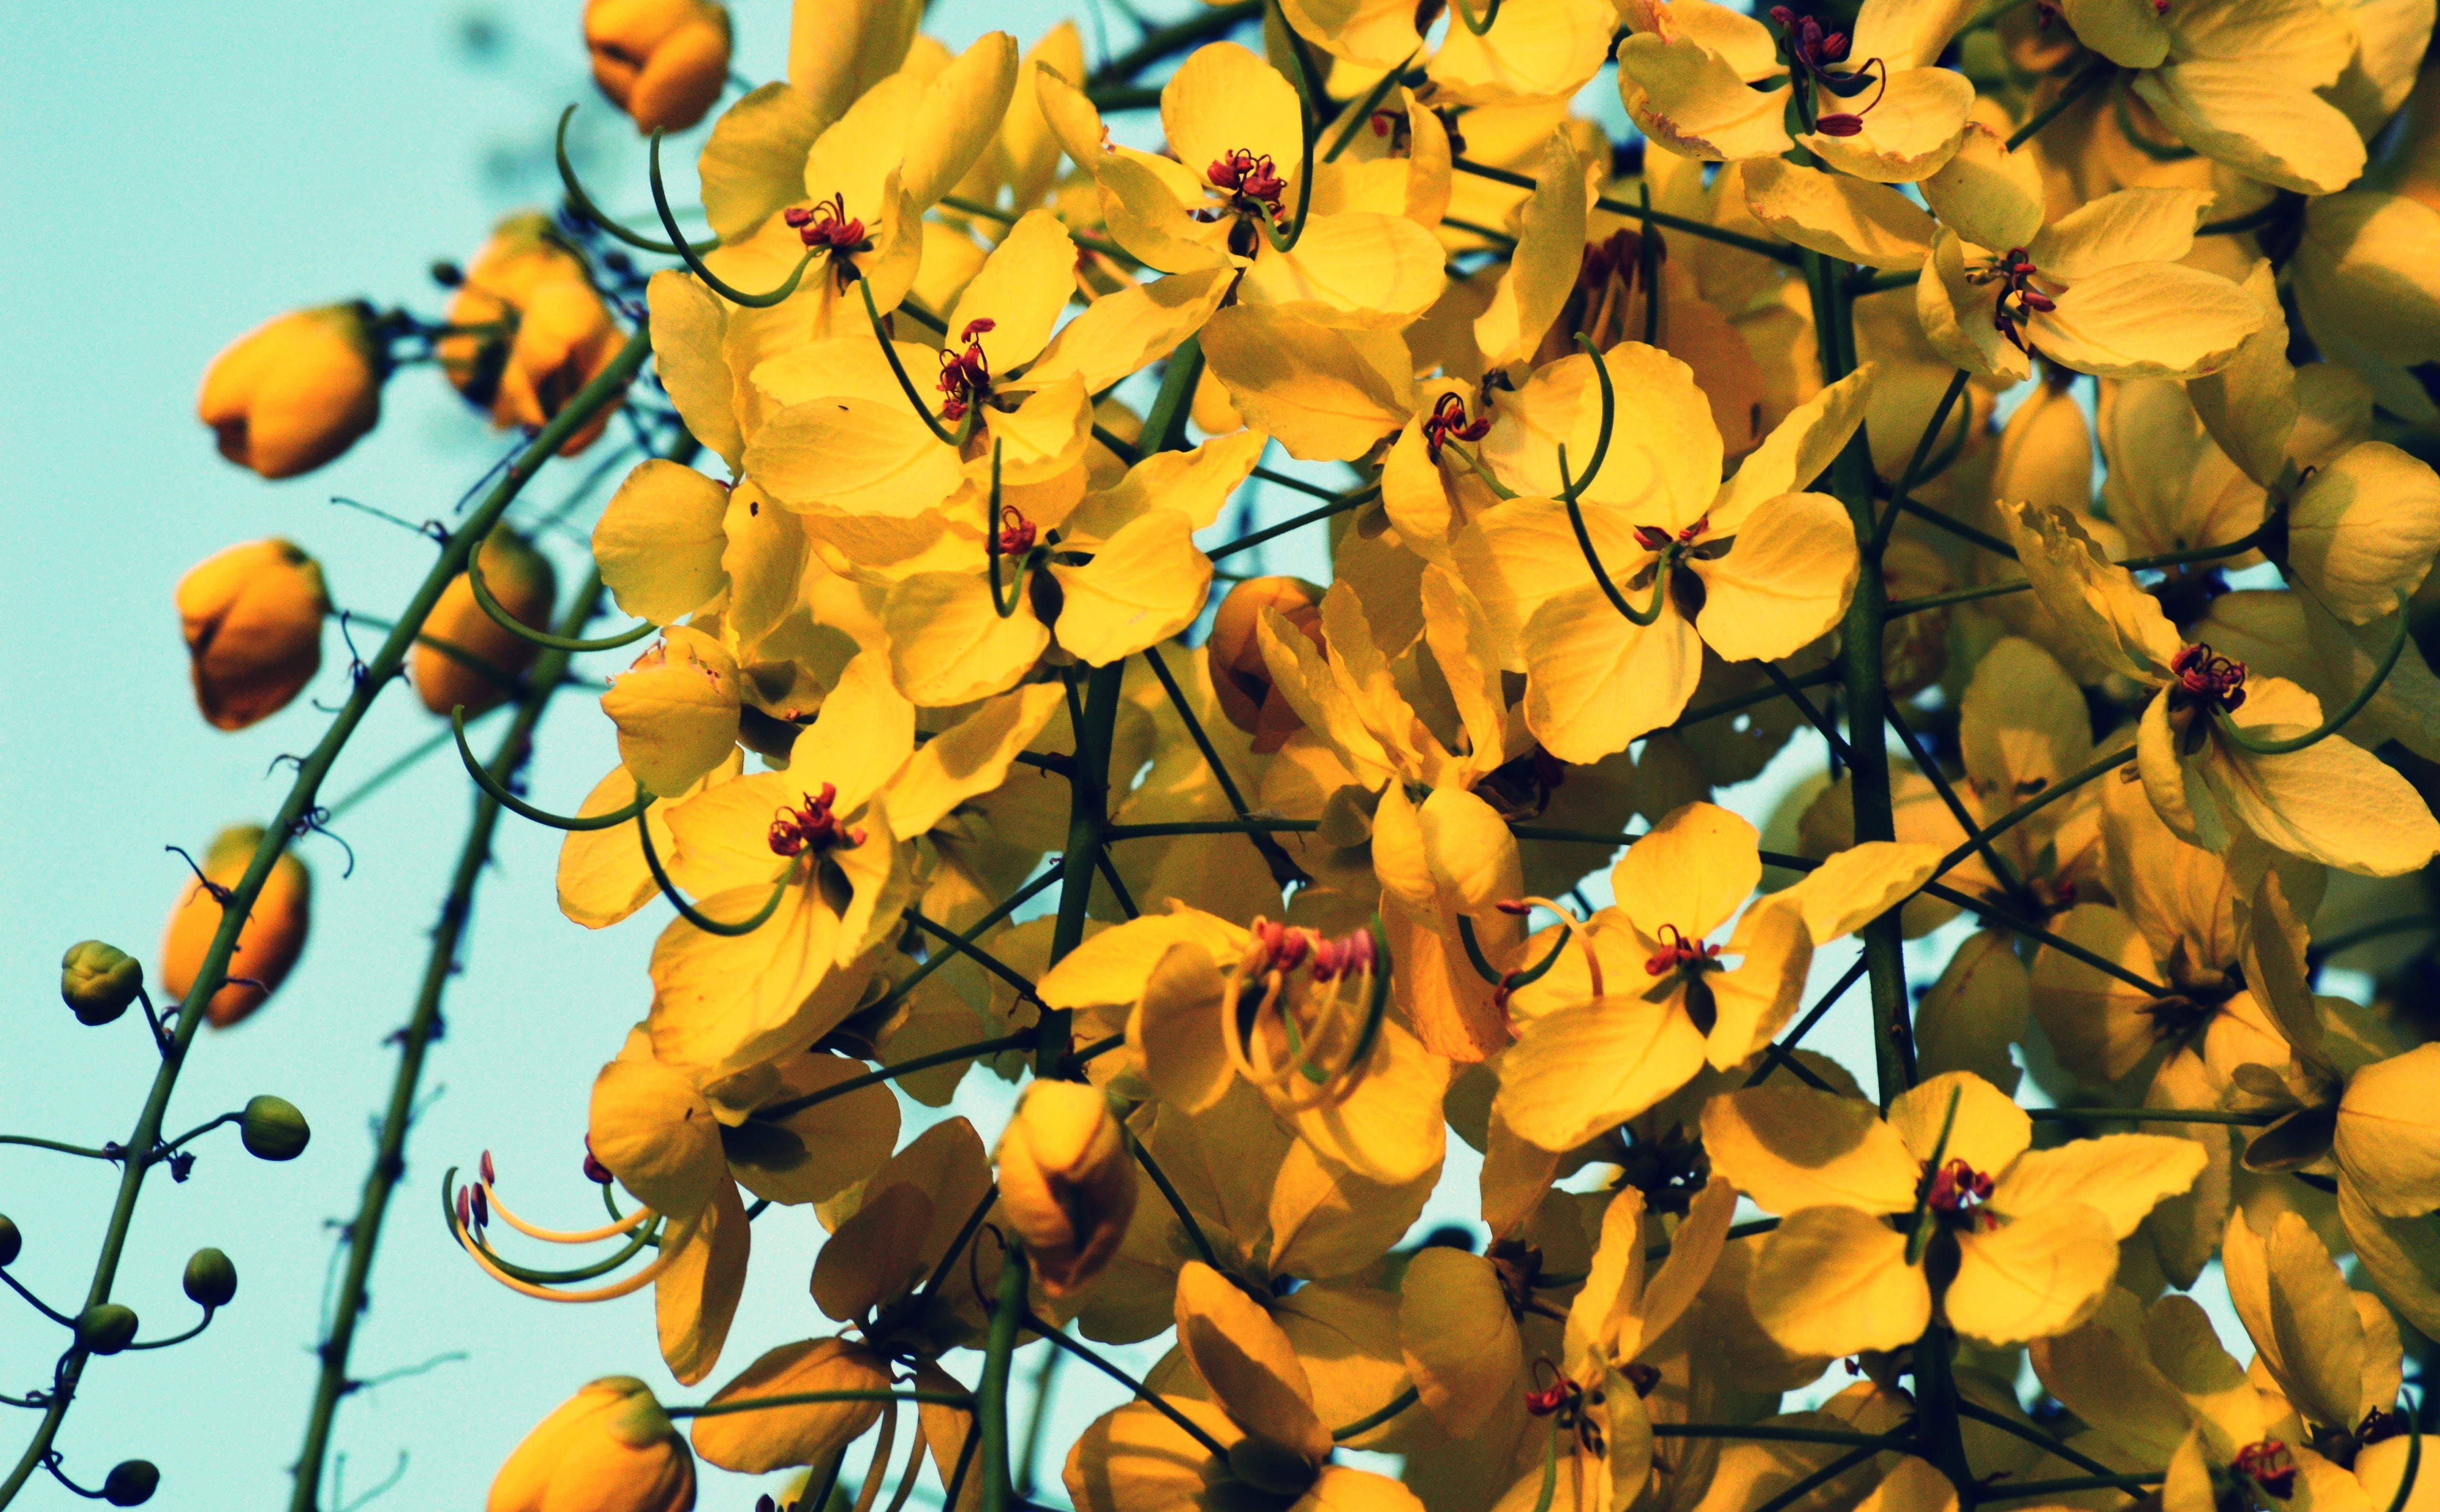 Yellow Flowers, yellow cassia flowers during daytime in close-up photography